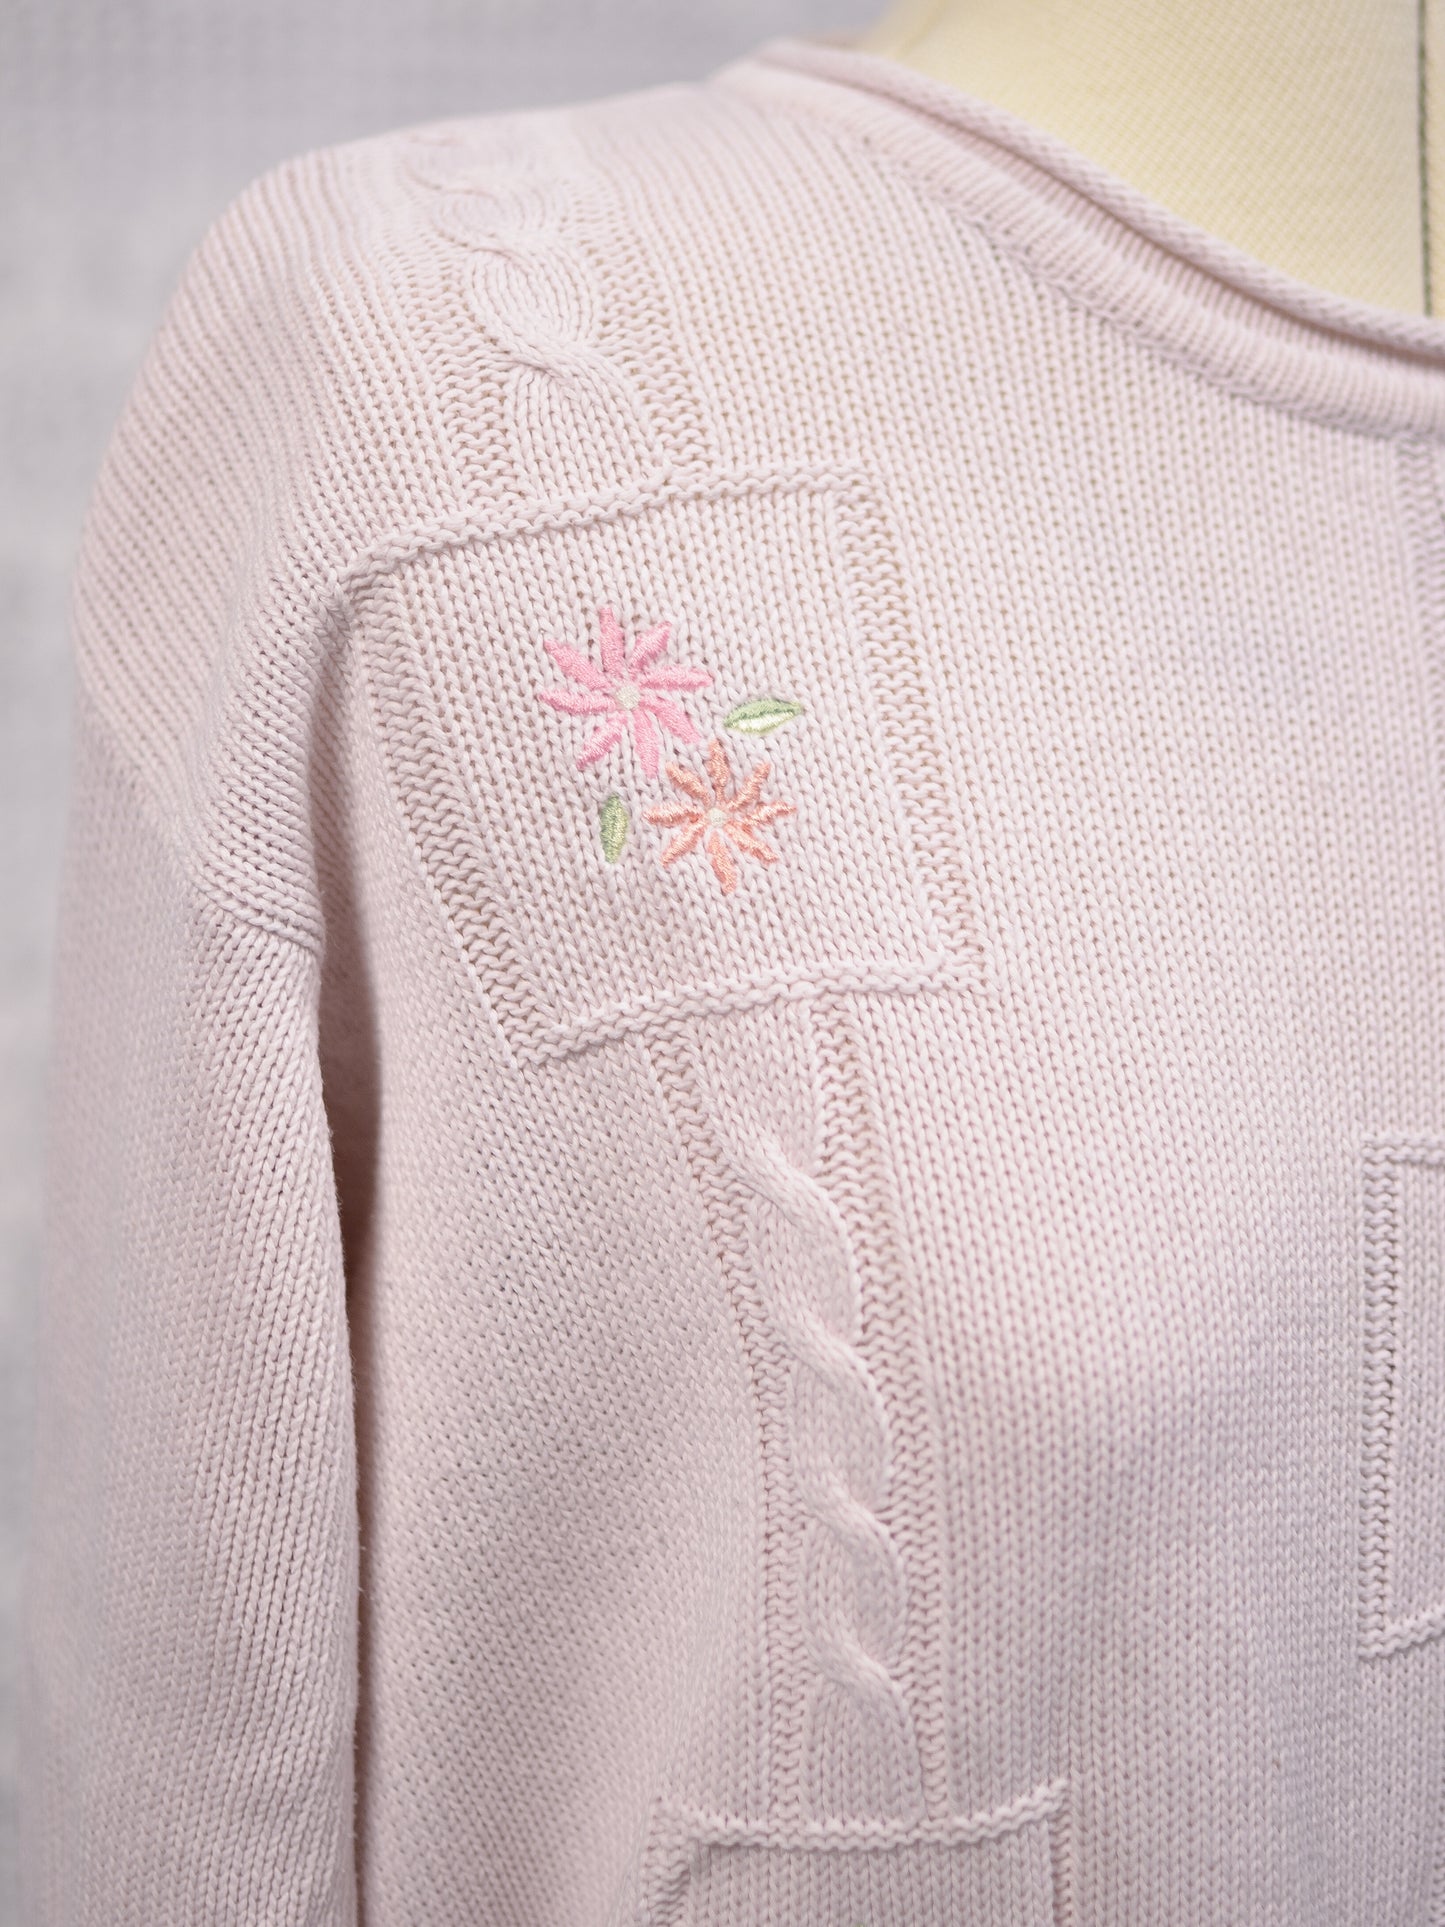 1990s Tulchan pale pink embroidered floral jumper